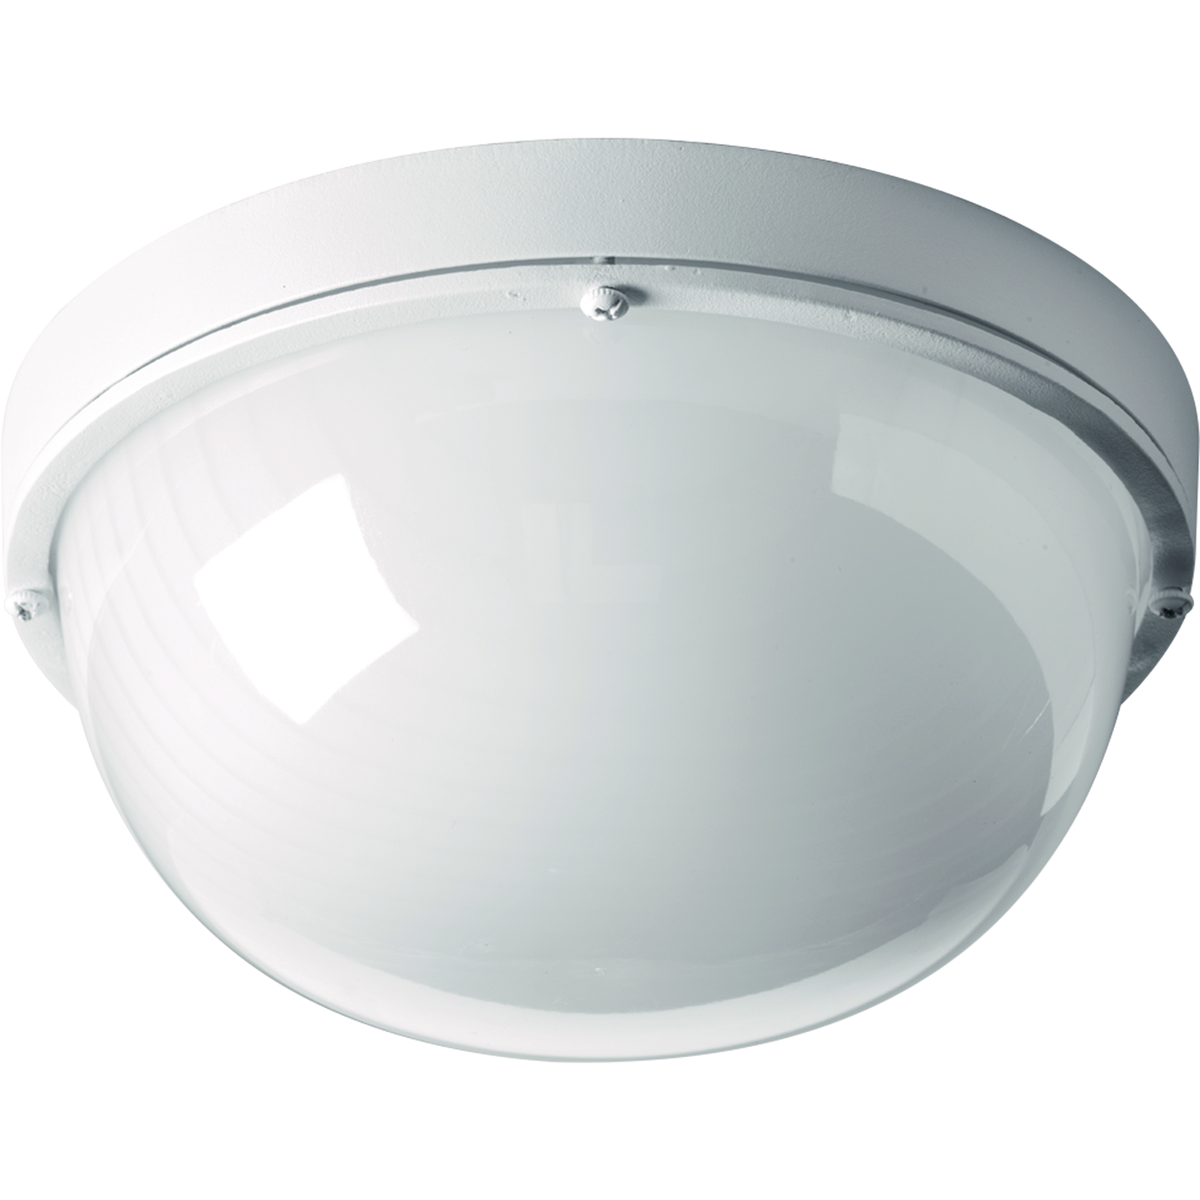 One-Light 9-1/2 in LED Wall or Ceiling Bulkhead. General purpose LED luminaire comprised of a die-cast aluminum frame and polycarbonate diffuser. Fixtures are impact resistant and can be mounted on wall or ceiling. Replaceable LED module. White finish.